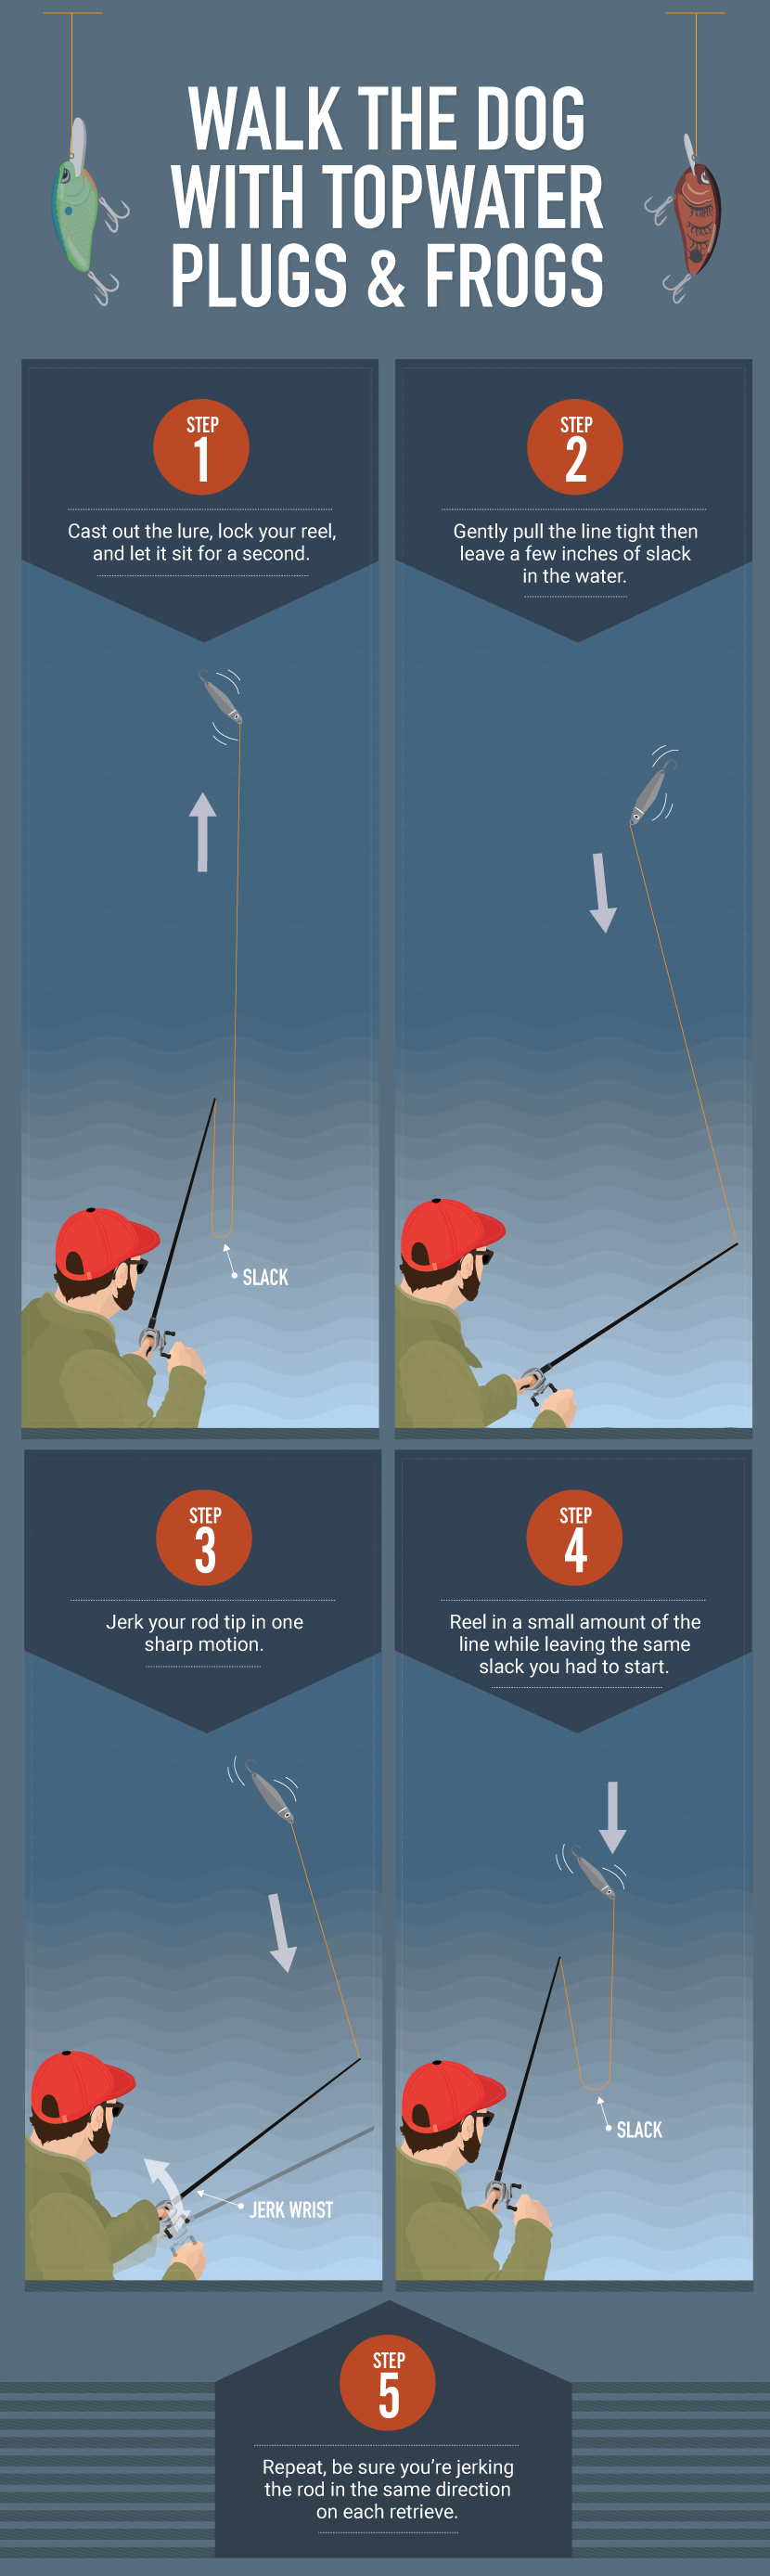 Fishing Rod Tricks For Tight Casts